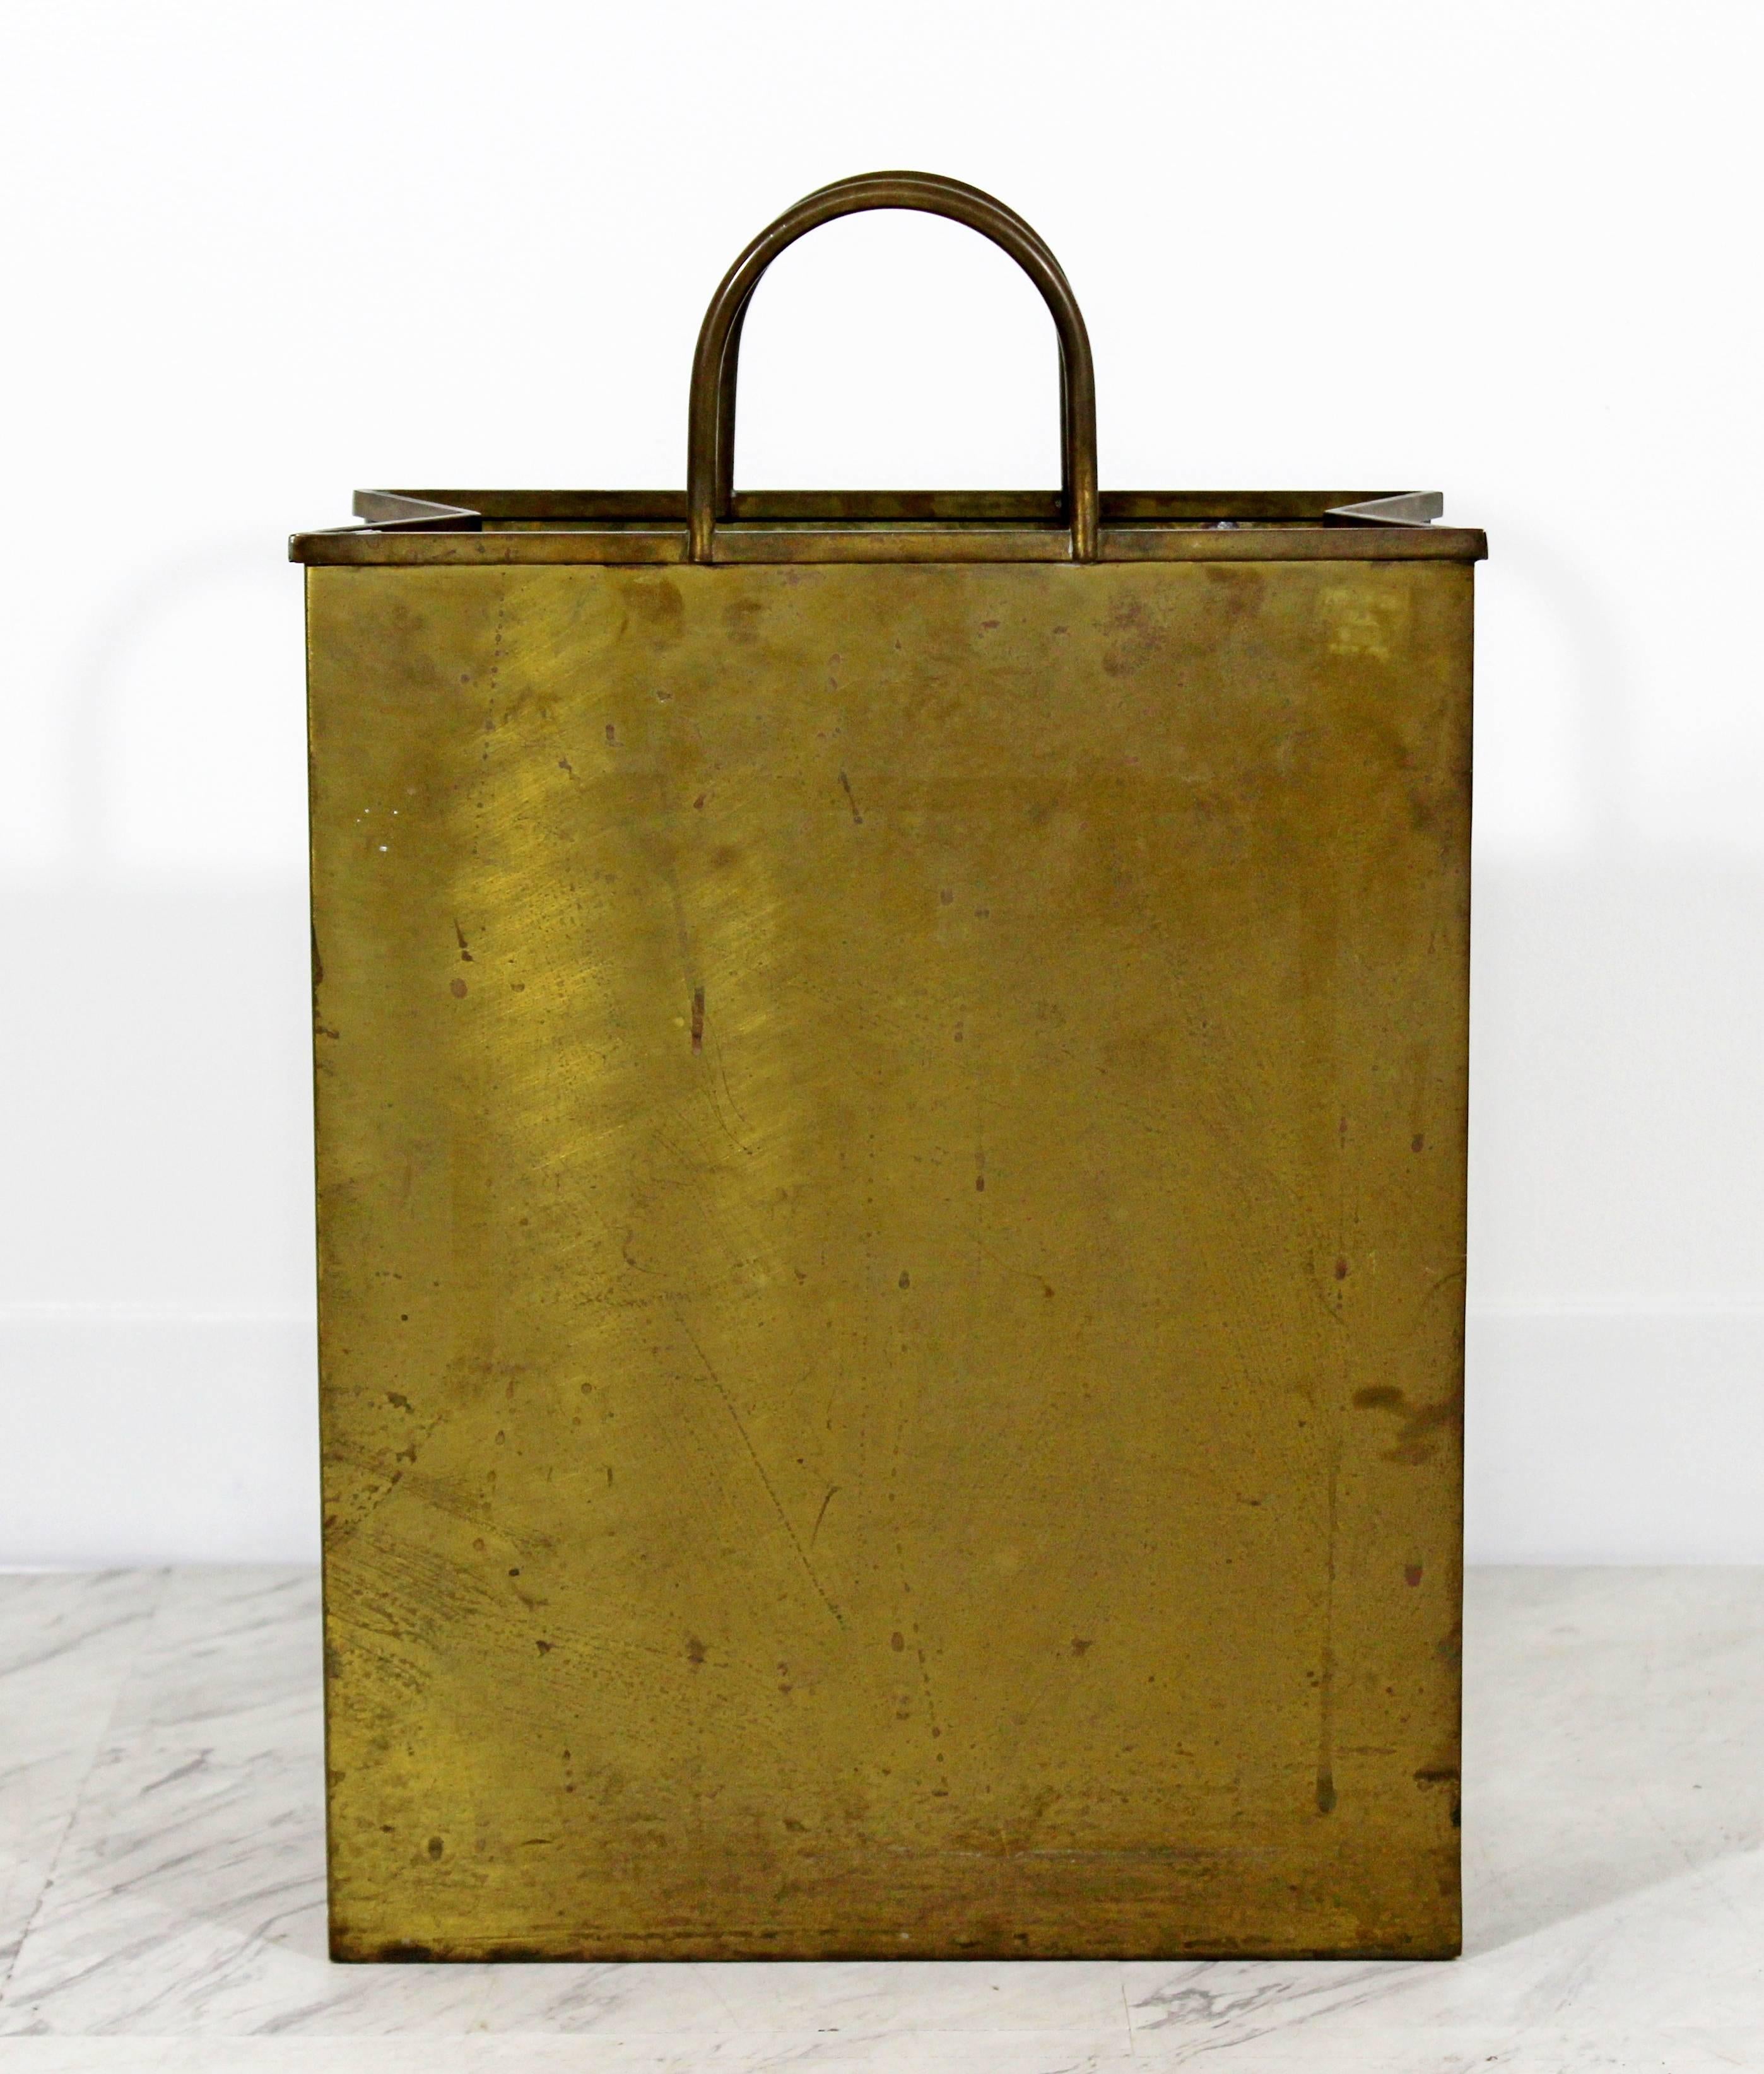 For your consideration is a fun planter or trash bin or magazine rack, in the shape of a shopping bag, made of brass, made in Italy. In excellent condition. The dimensions are 12.5